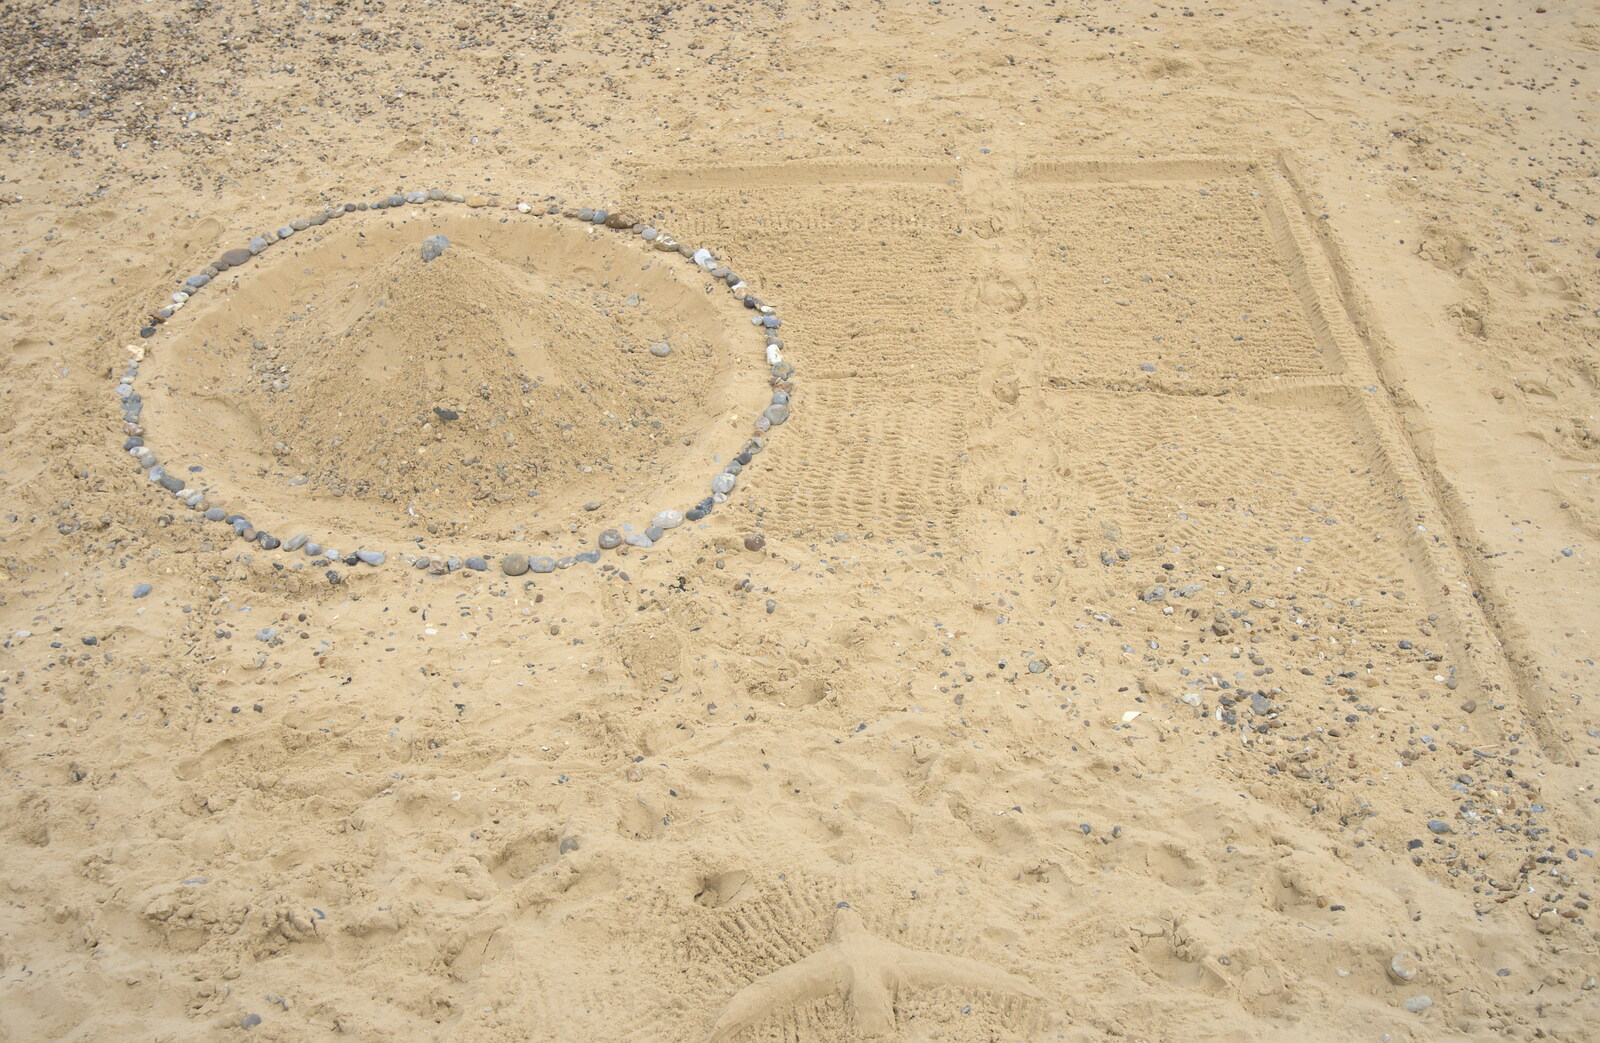 Beach art from A Night at the Crown Hotel, Southwold, Suffolk - 13th June 2012